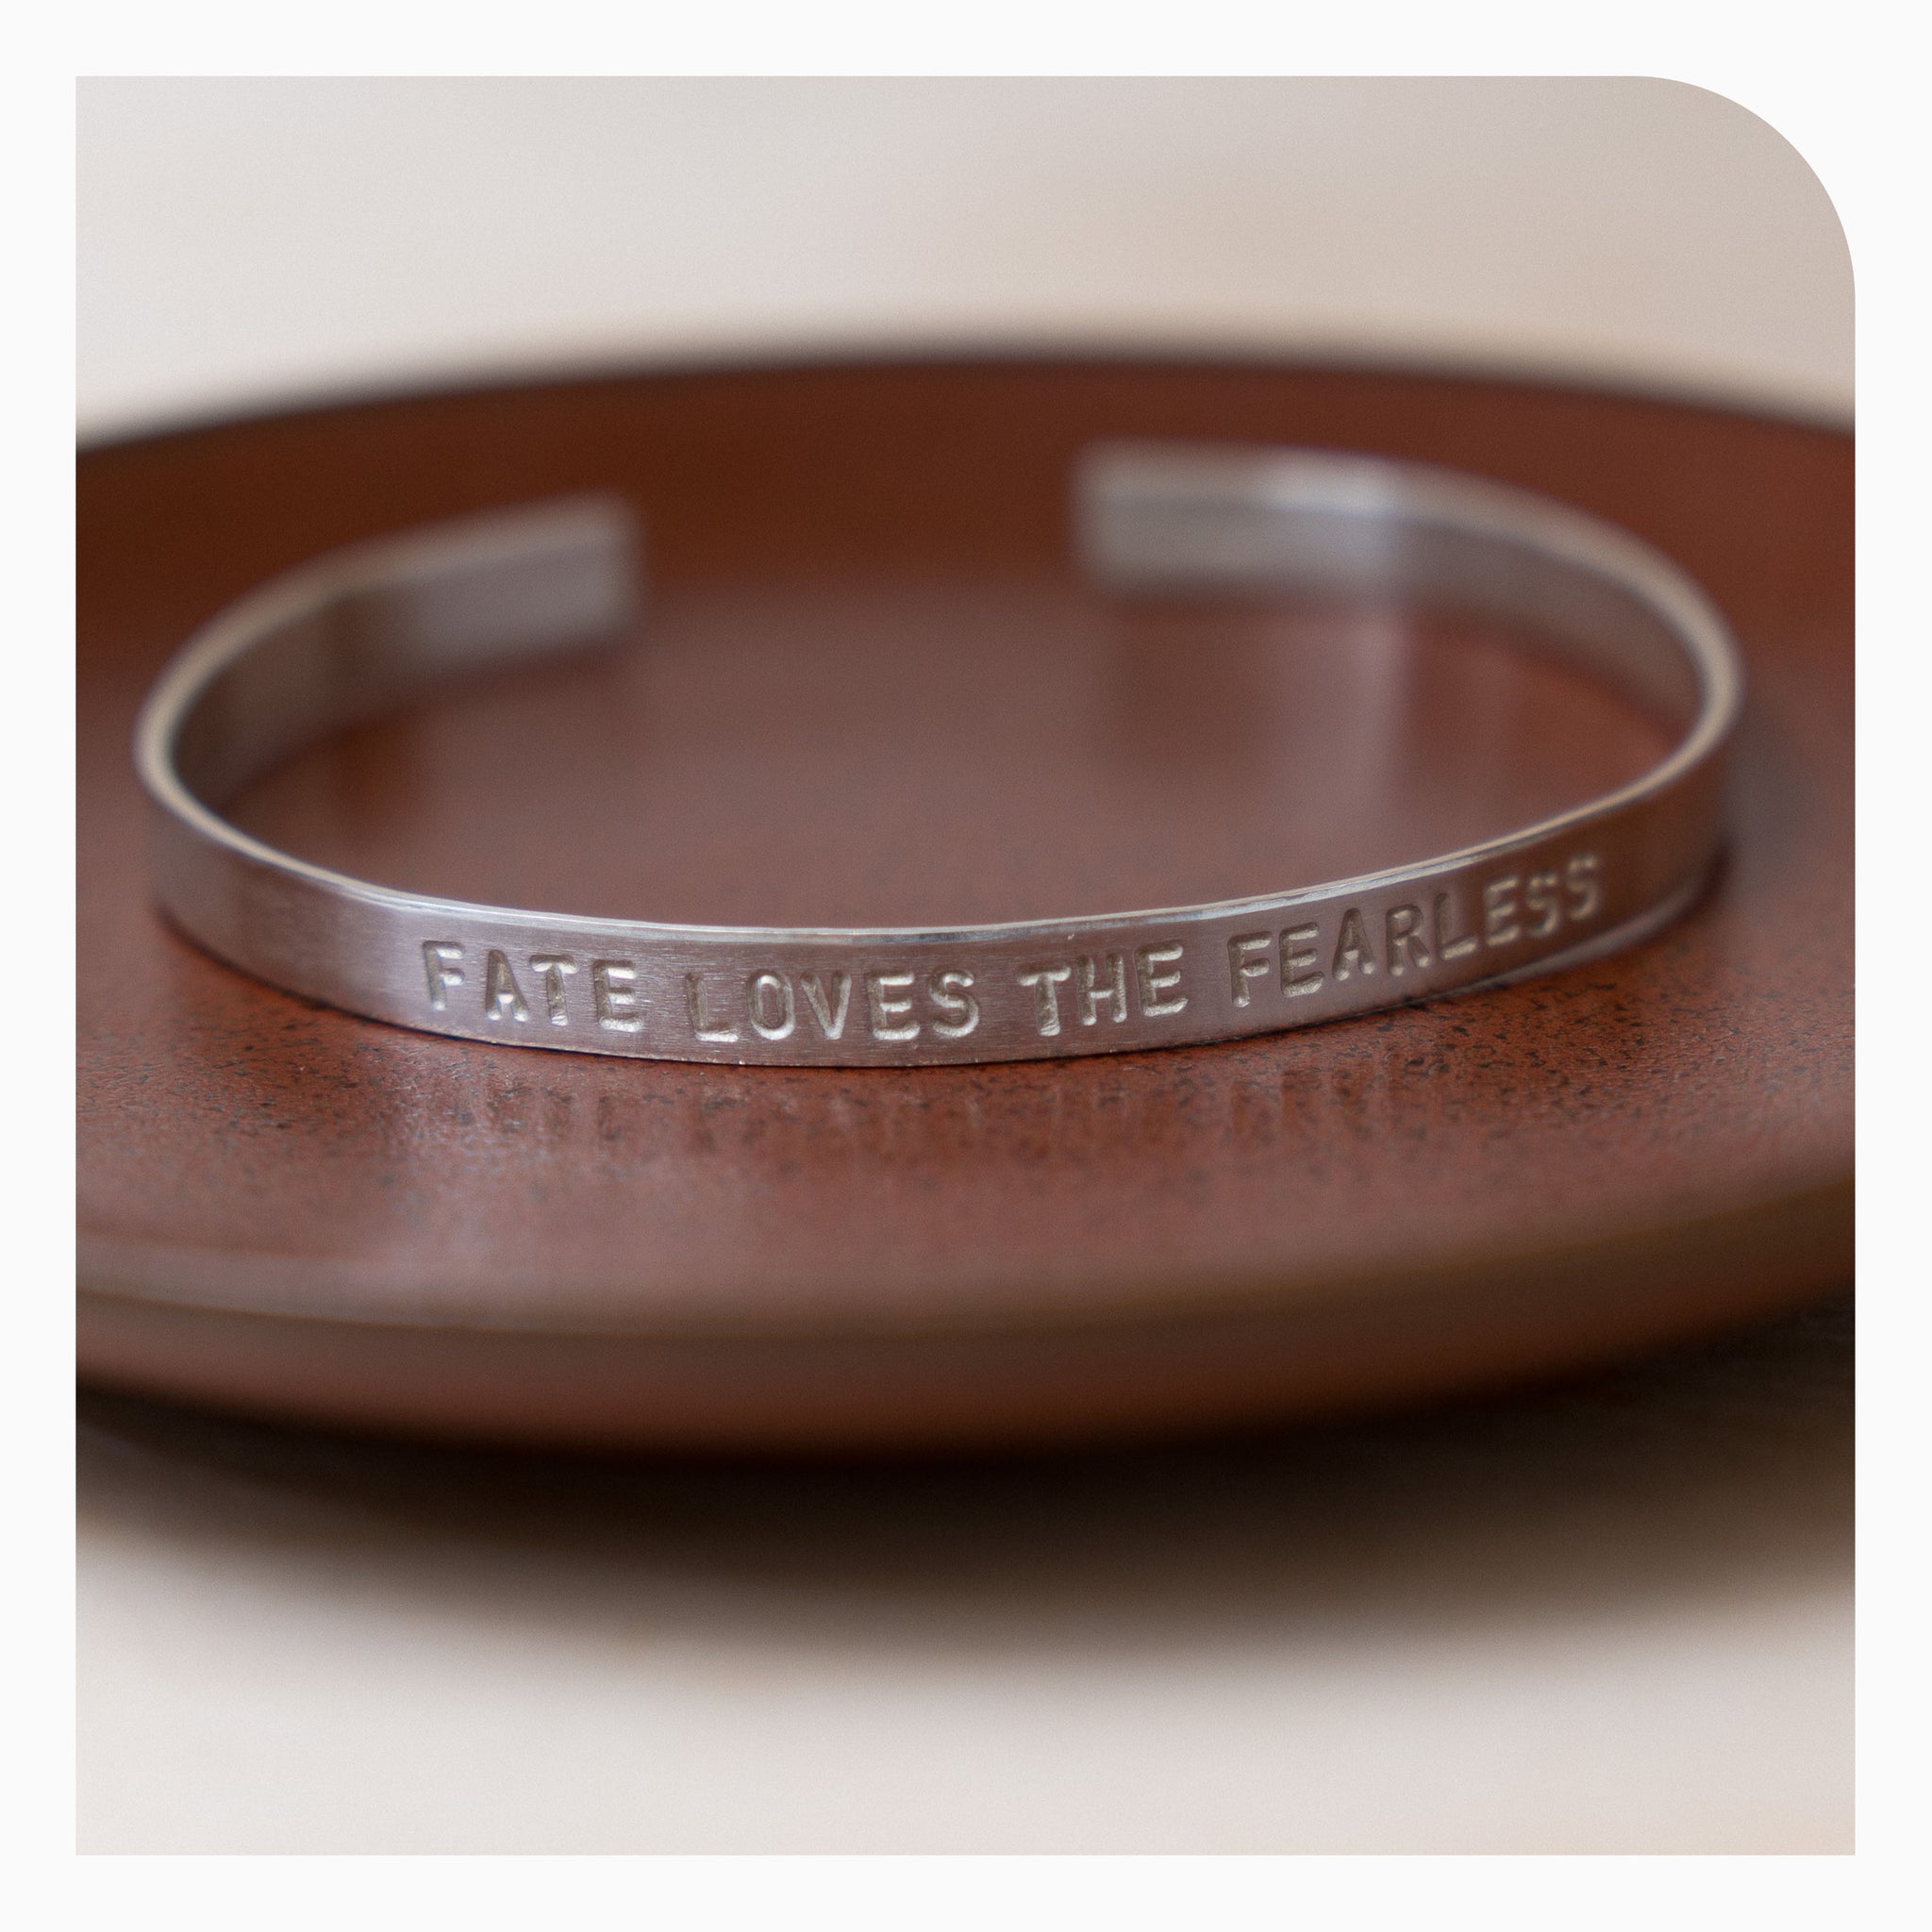 Lucy Addison - "Fate Loves The Fearless" Cuff Bangle